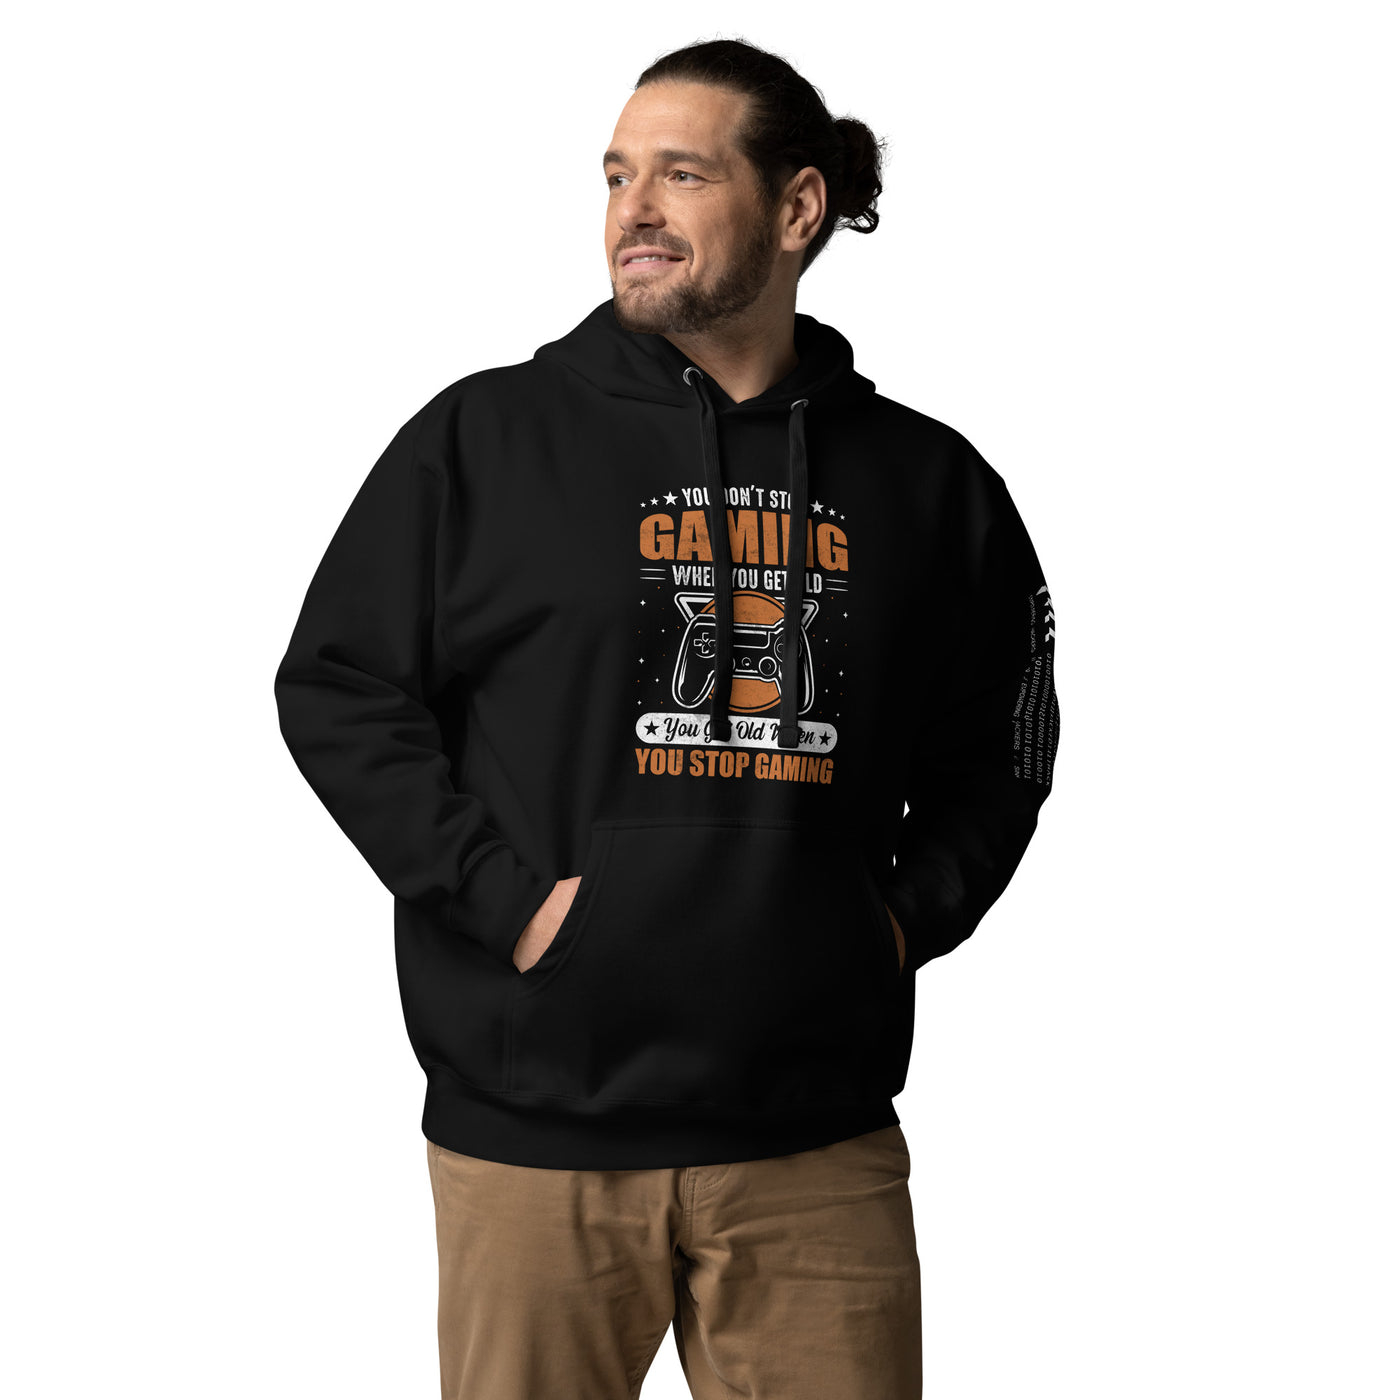 You don't Stop gaming, when you Get old, you Get old, when you Stop Gaming - Unisex Hoodie